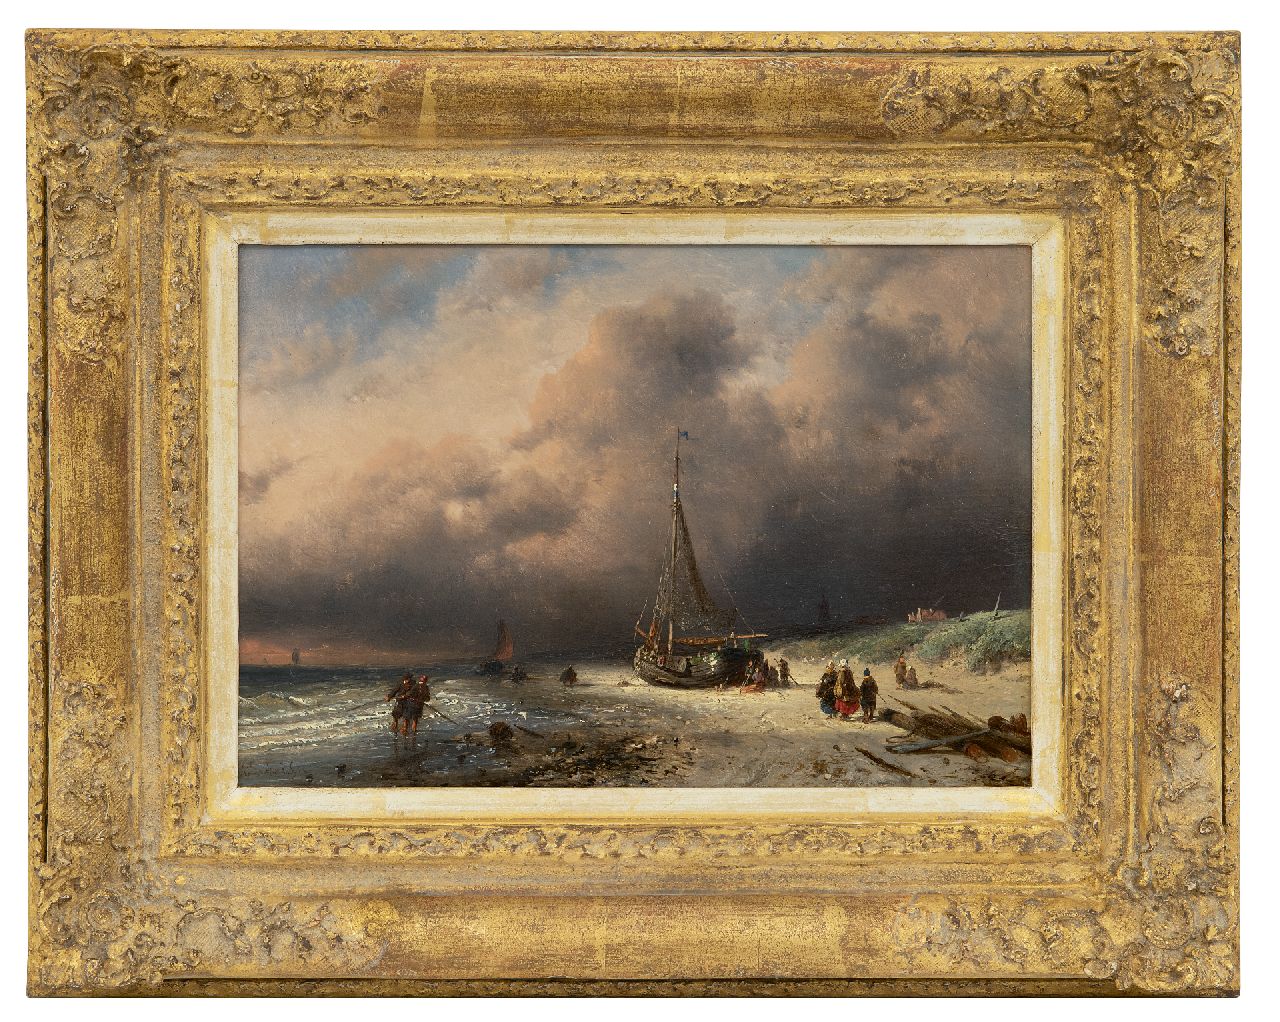 Leickert C.H.J.  | 'Charles' Henri Joseph Leickert | Paintings offered for sale | Bringing in the catch, oil on panel 17.5 x 25.4 cm, signed l.l. and dated '50